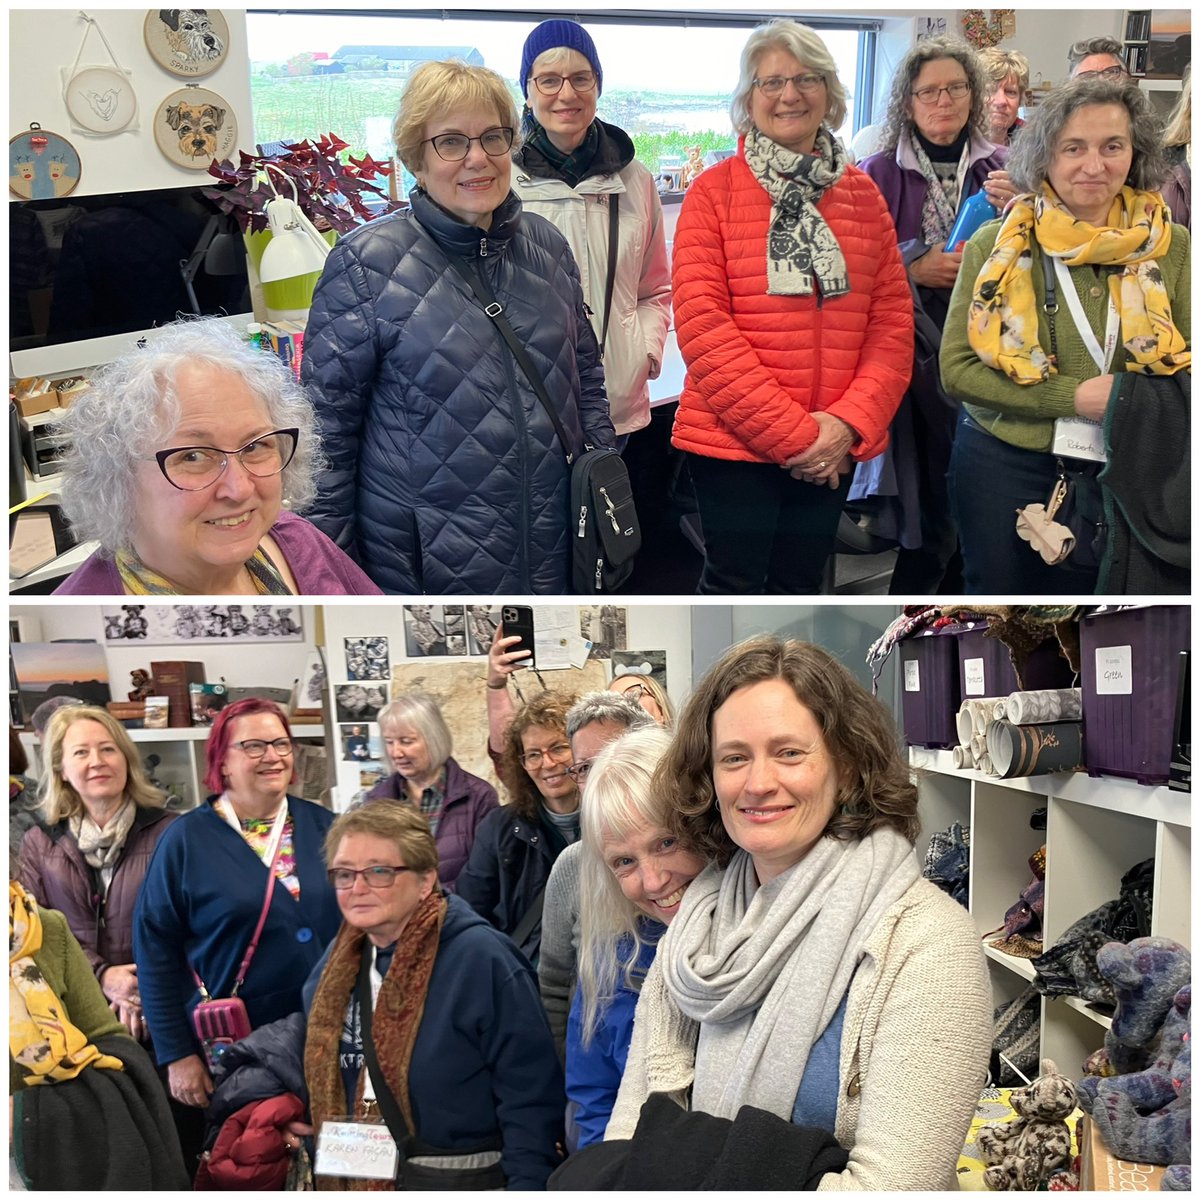 a busy Friday morning, with our first tour groups, Kirsty and her knitting group from KnittingTours.com followed by Kate Humble with her Wild and Woolly group from Shetland Nature Lovely to meet you all, enjoy our beautiful Islands and come back soon🧸 #burrabears #shetland